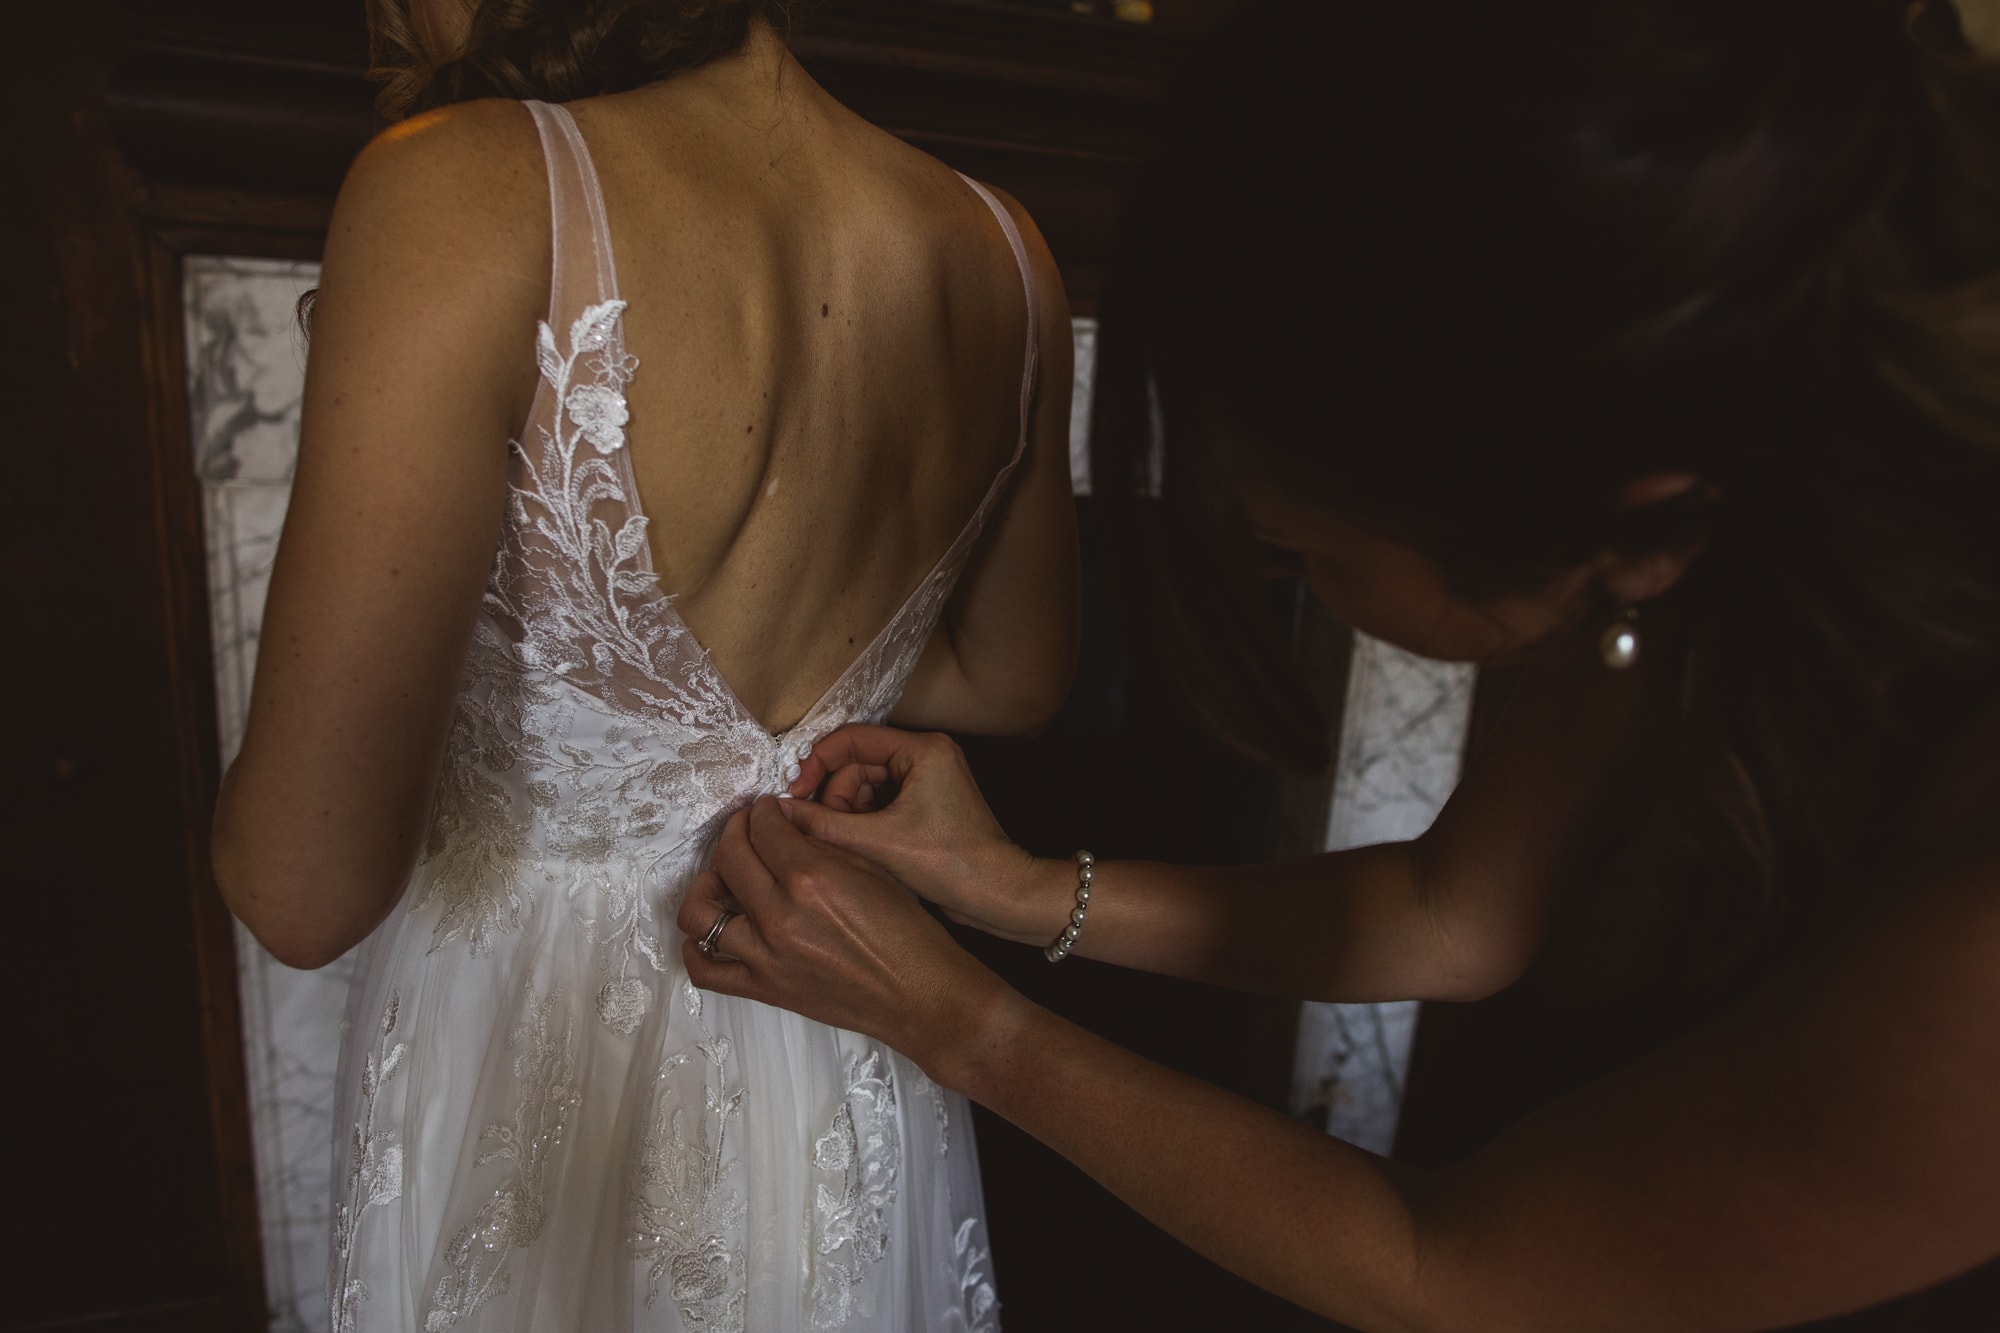 brides dress being buttoned up